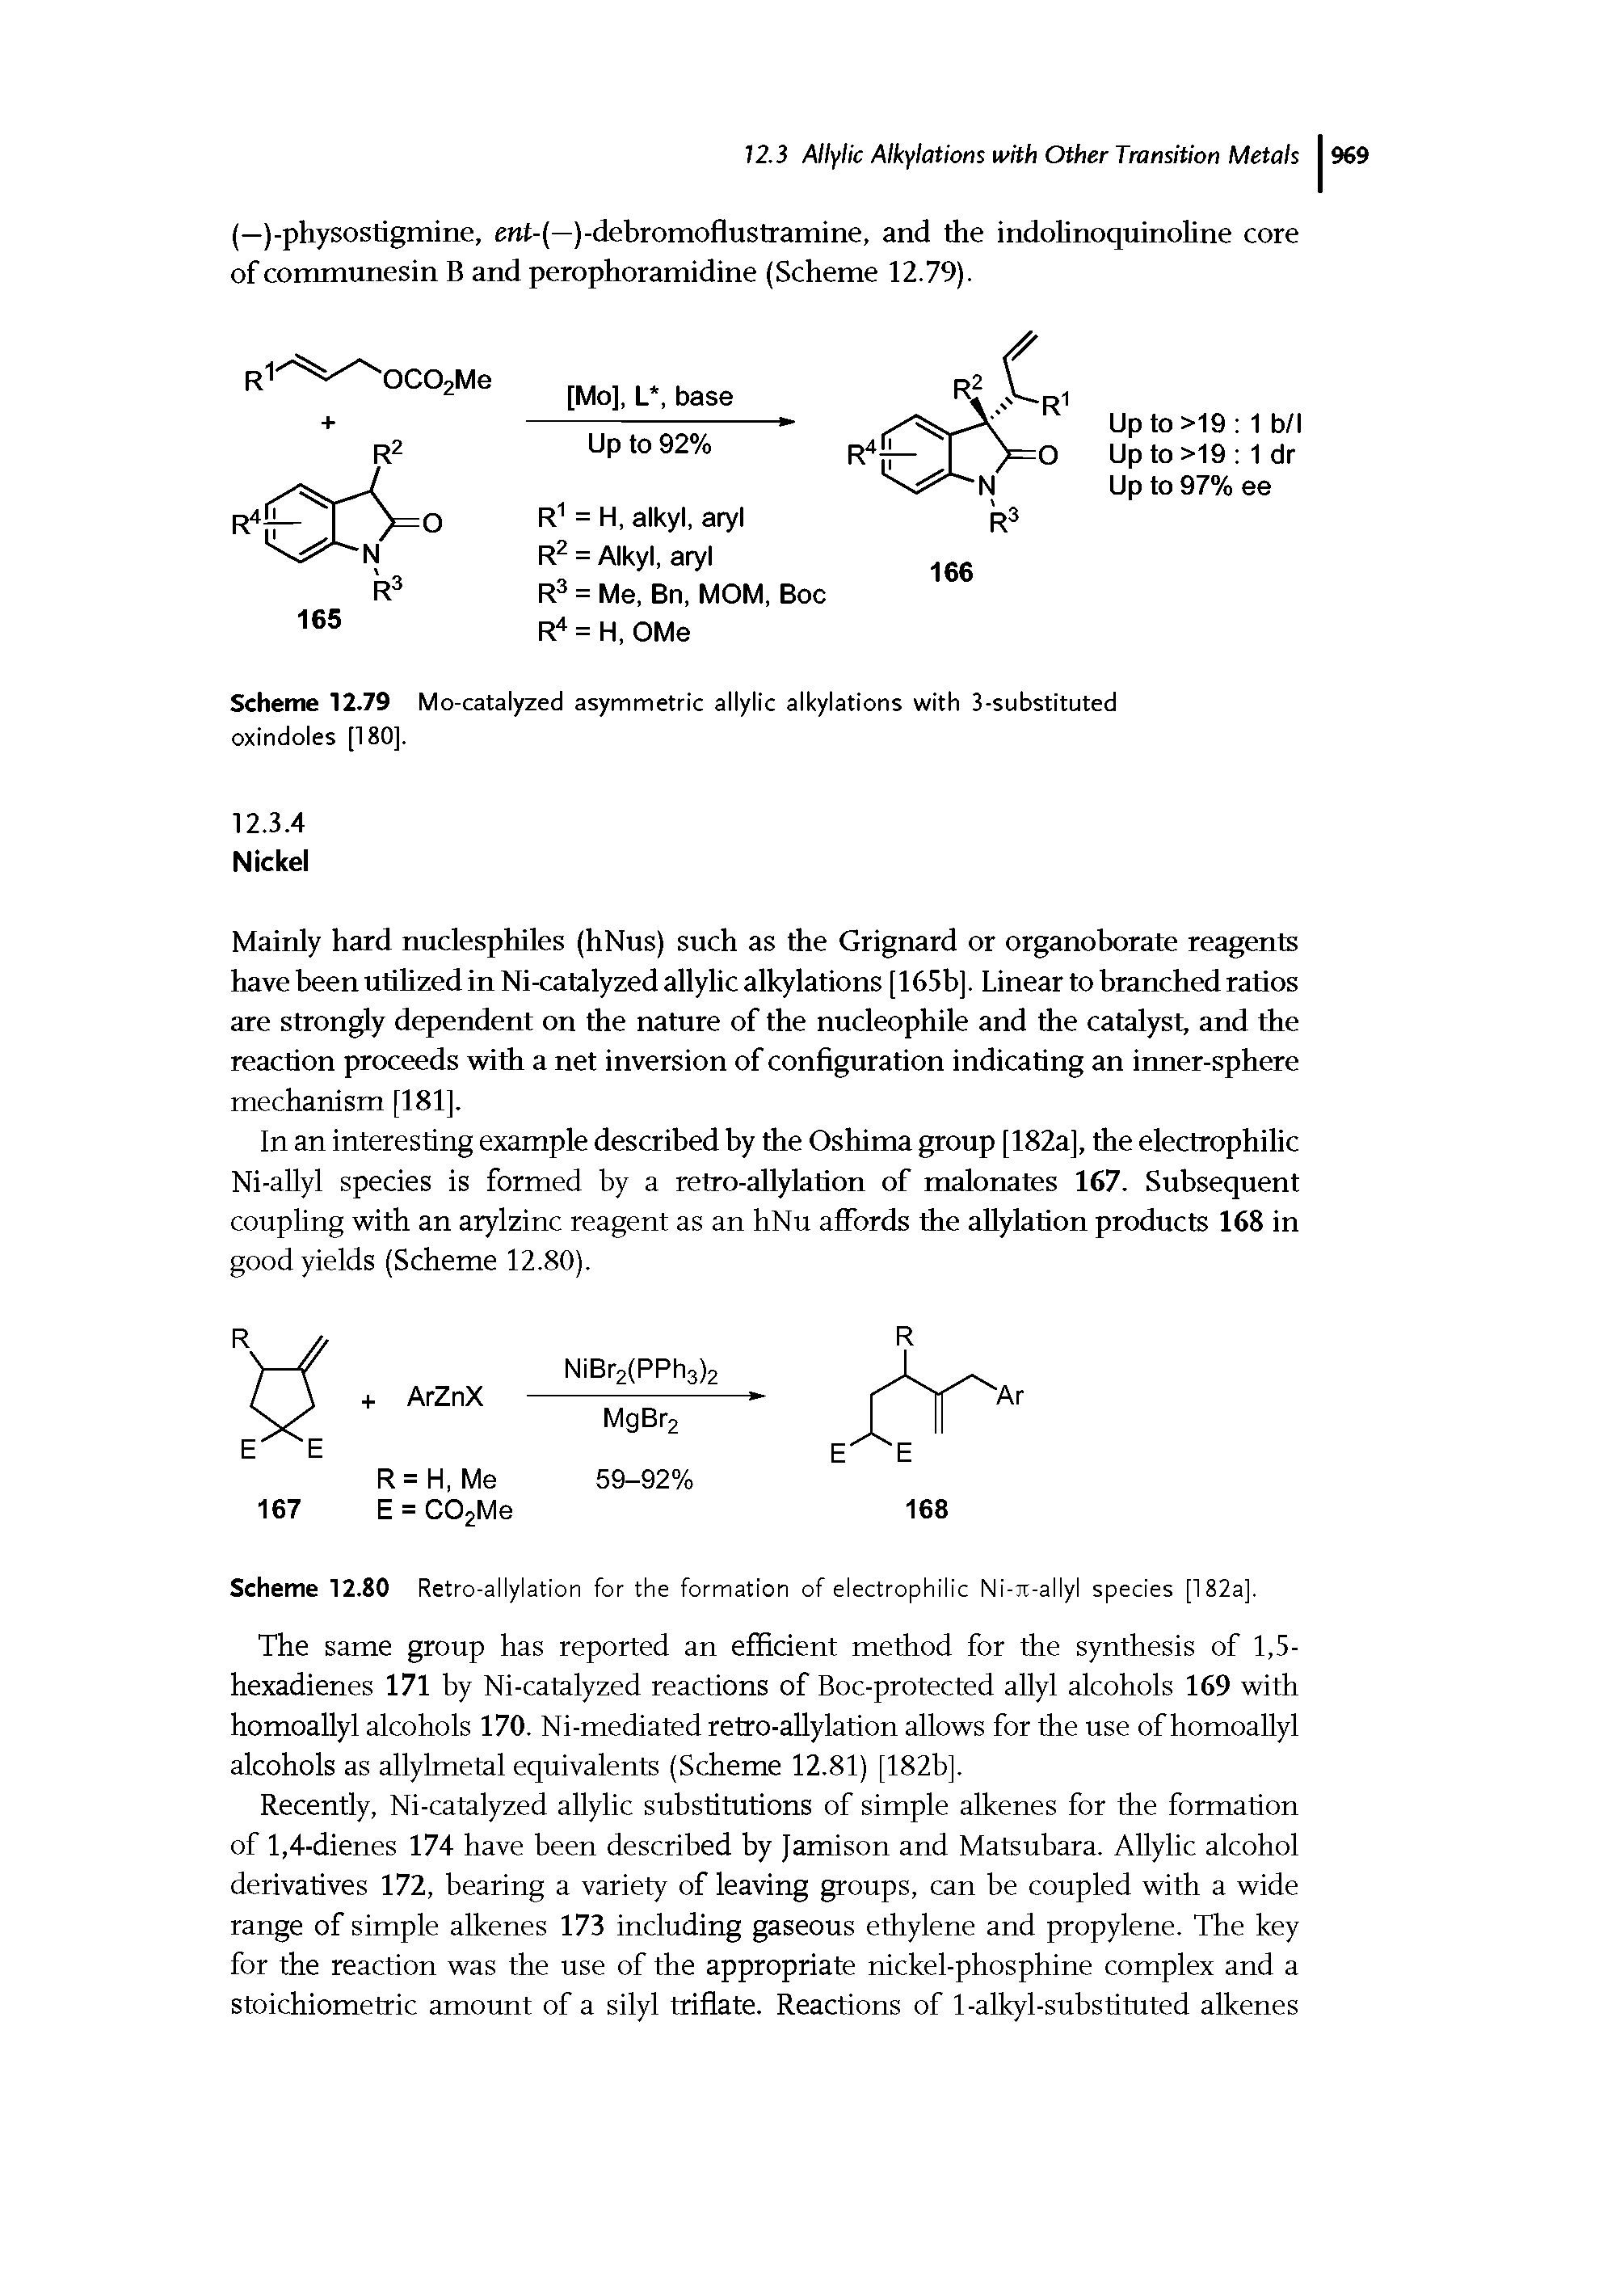 Scheme 12.80 Retro-allylation for the formation of electrophilic Ni- it-allyl species [182a].